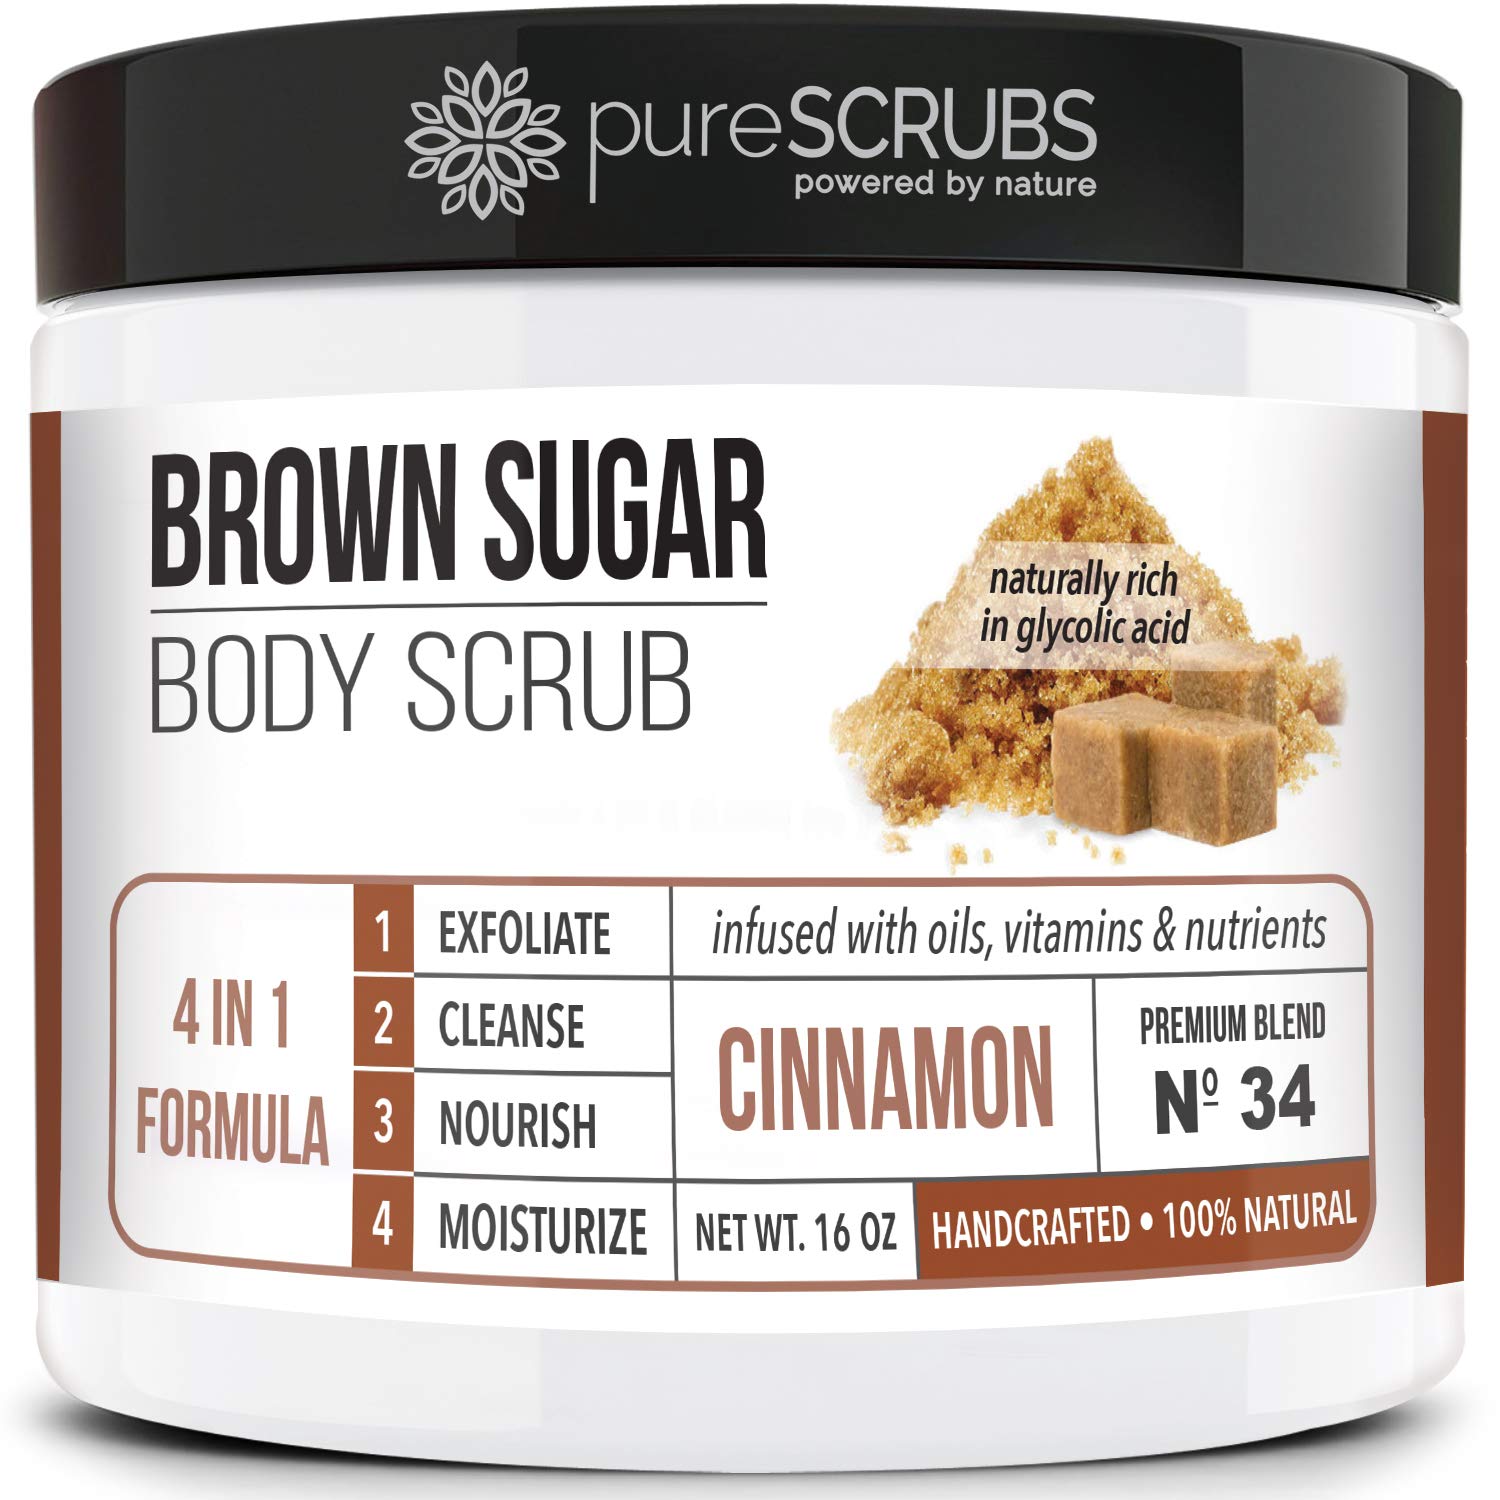 Book Cover pureSCRUBS Premium Organic Brown Sugar CINNAMON FACE & BODY SCRUB Set - Large 16oz, Infused With Organic Essential Oils & Nutrients INCLUDES Wooden Spoon, Loofah & Mini Exfoliating Bar Soap